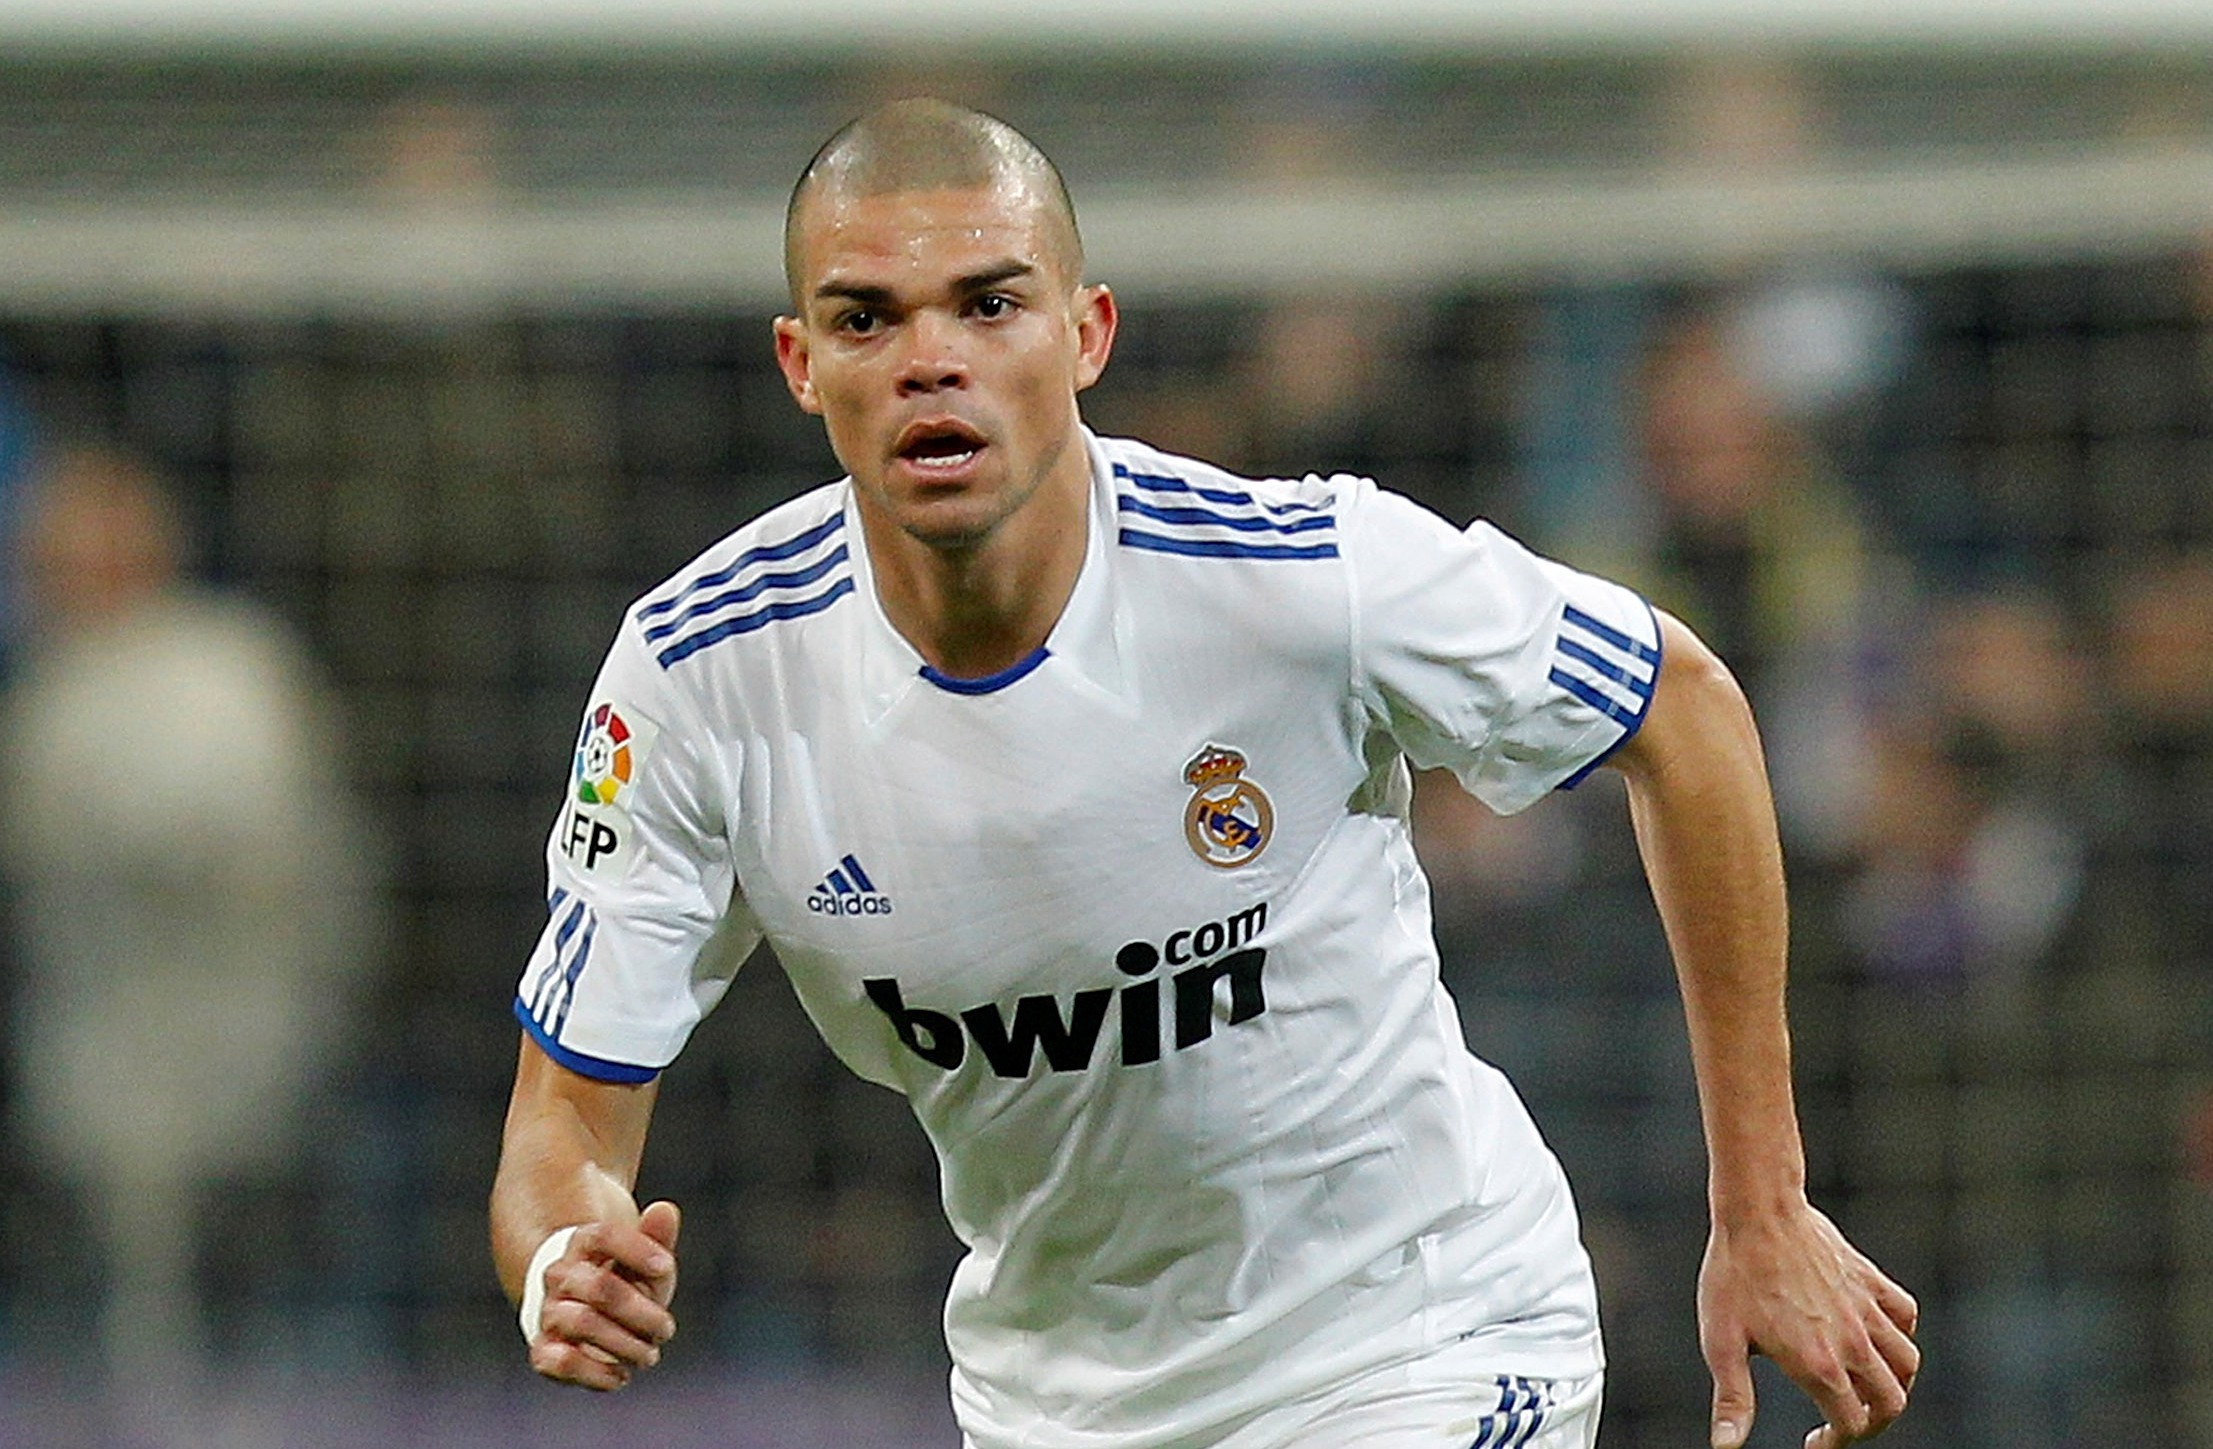 Wallpaper The Player Of Real Madrid Pepe On The Field On Desktop.com Wallpaper, Picture, Image!